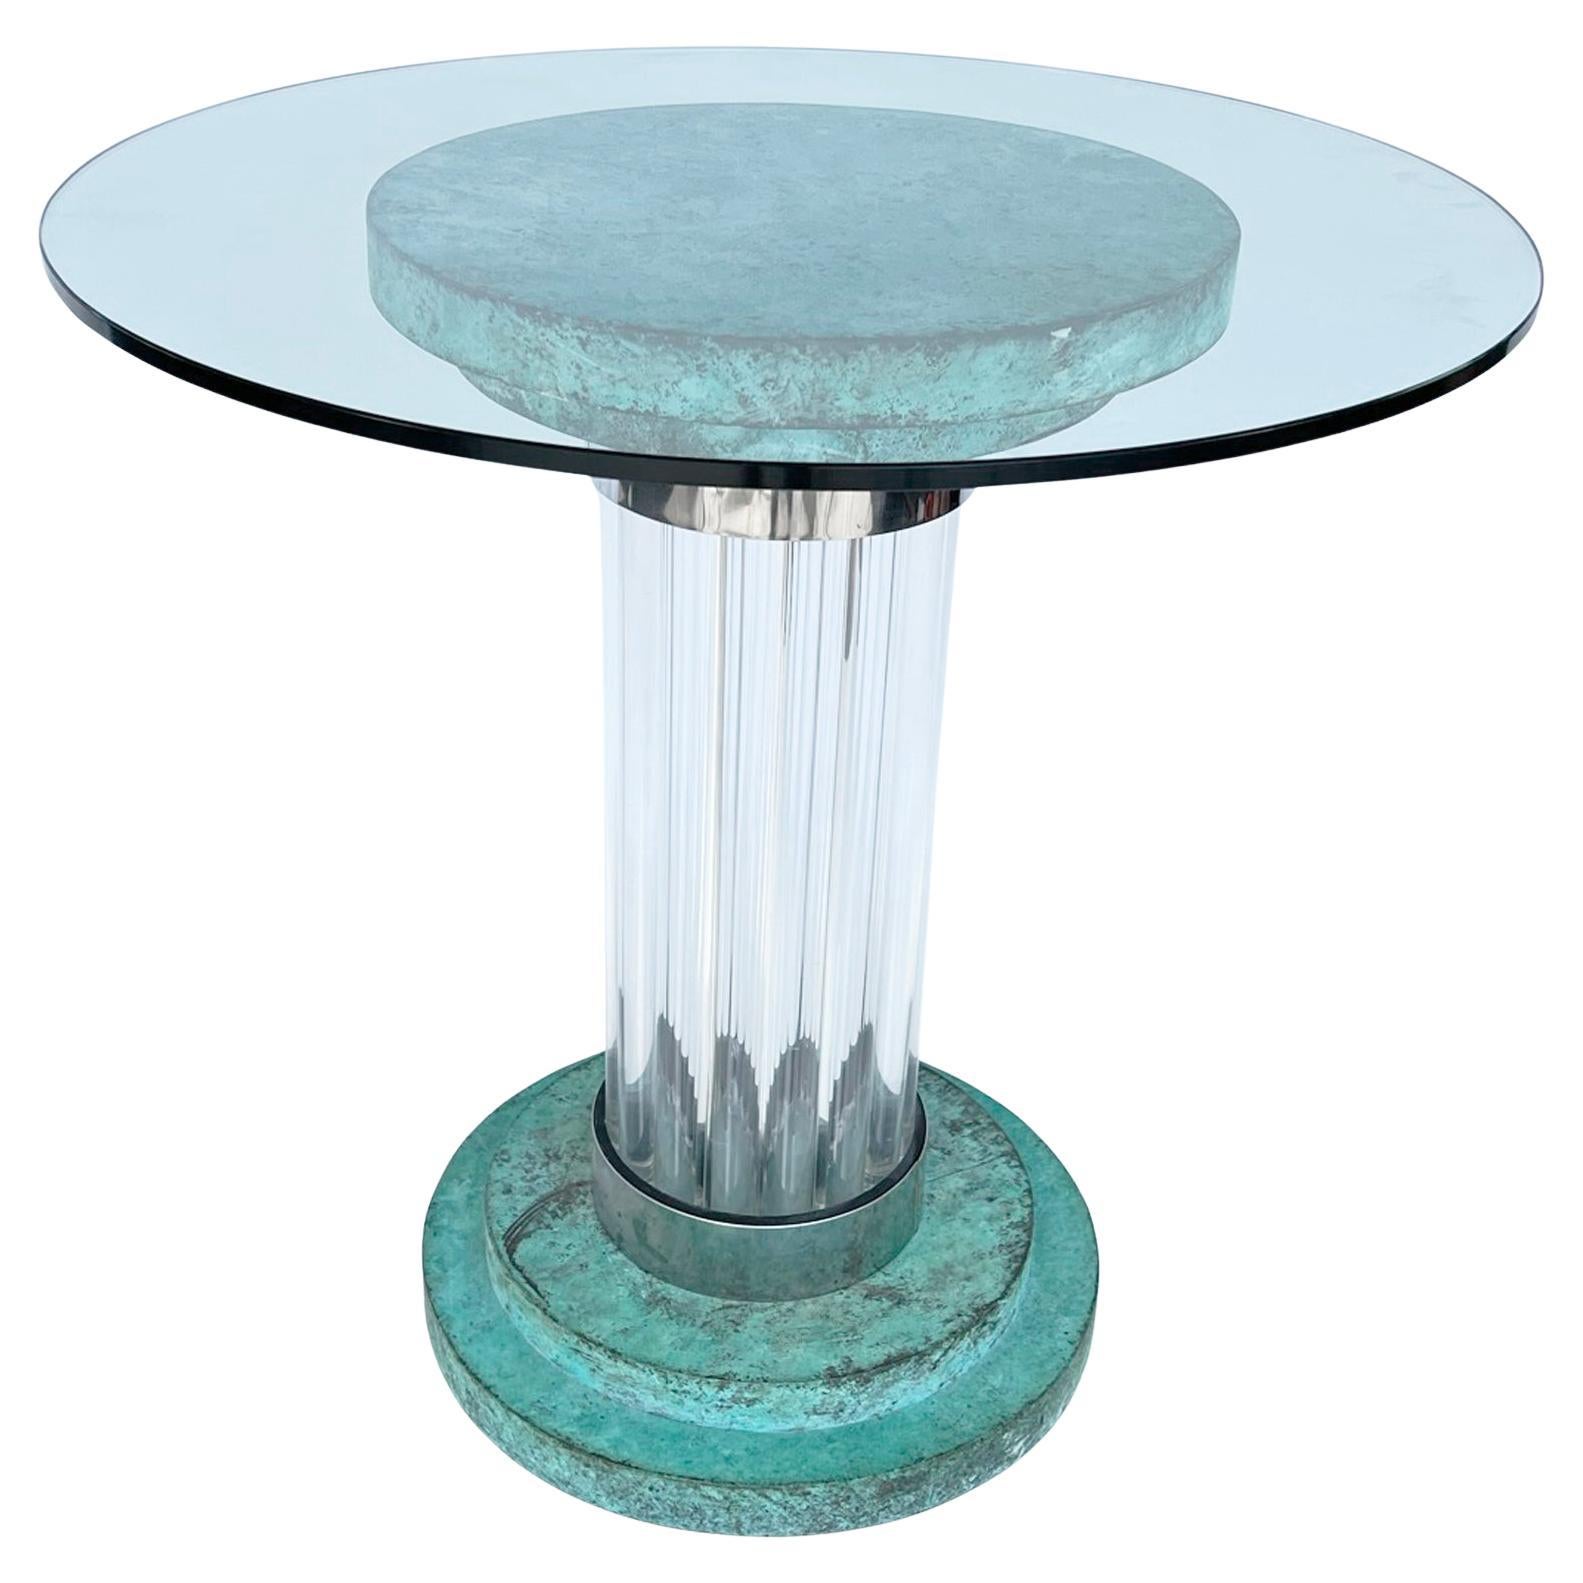 Romeo Rega Verdigris and Lucite Pedestal Table Base with Glass Top